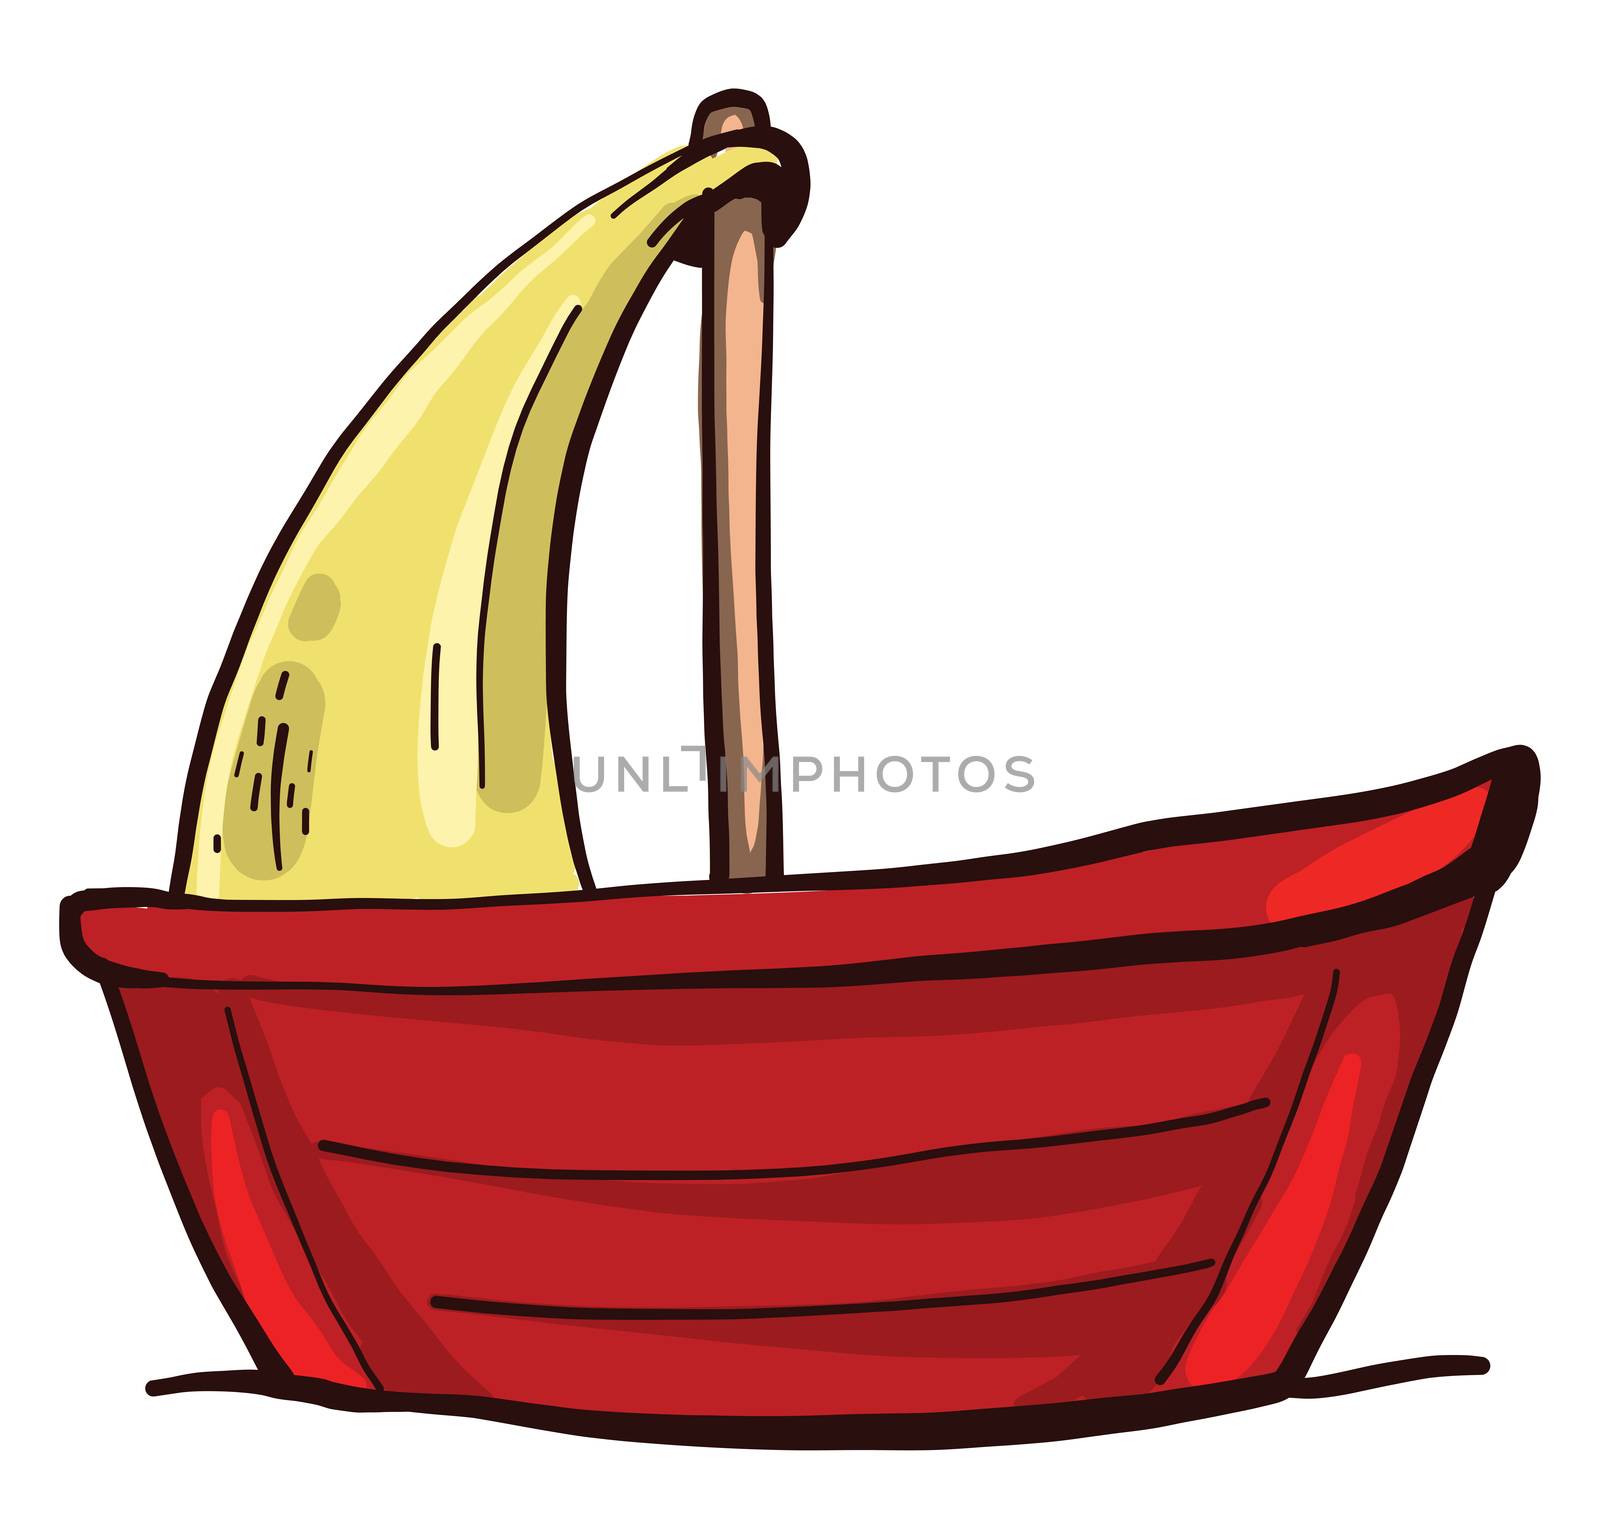 Red small boat , illustration, vector on white background